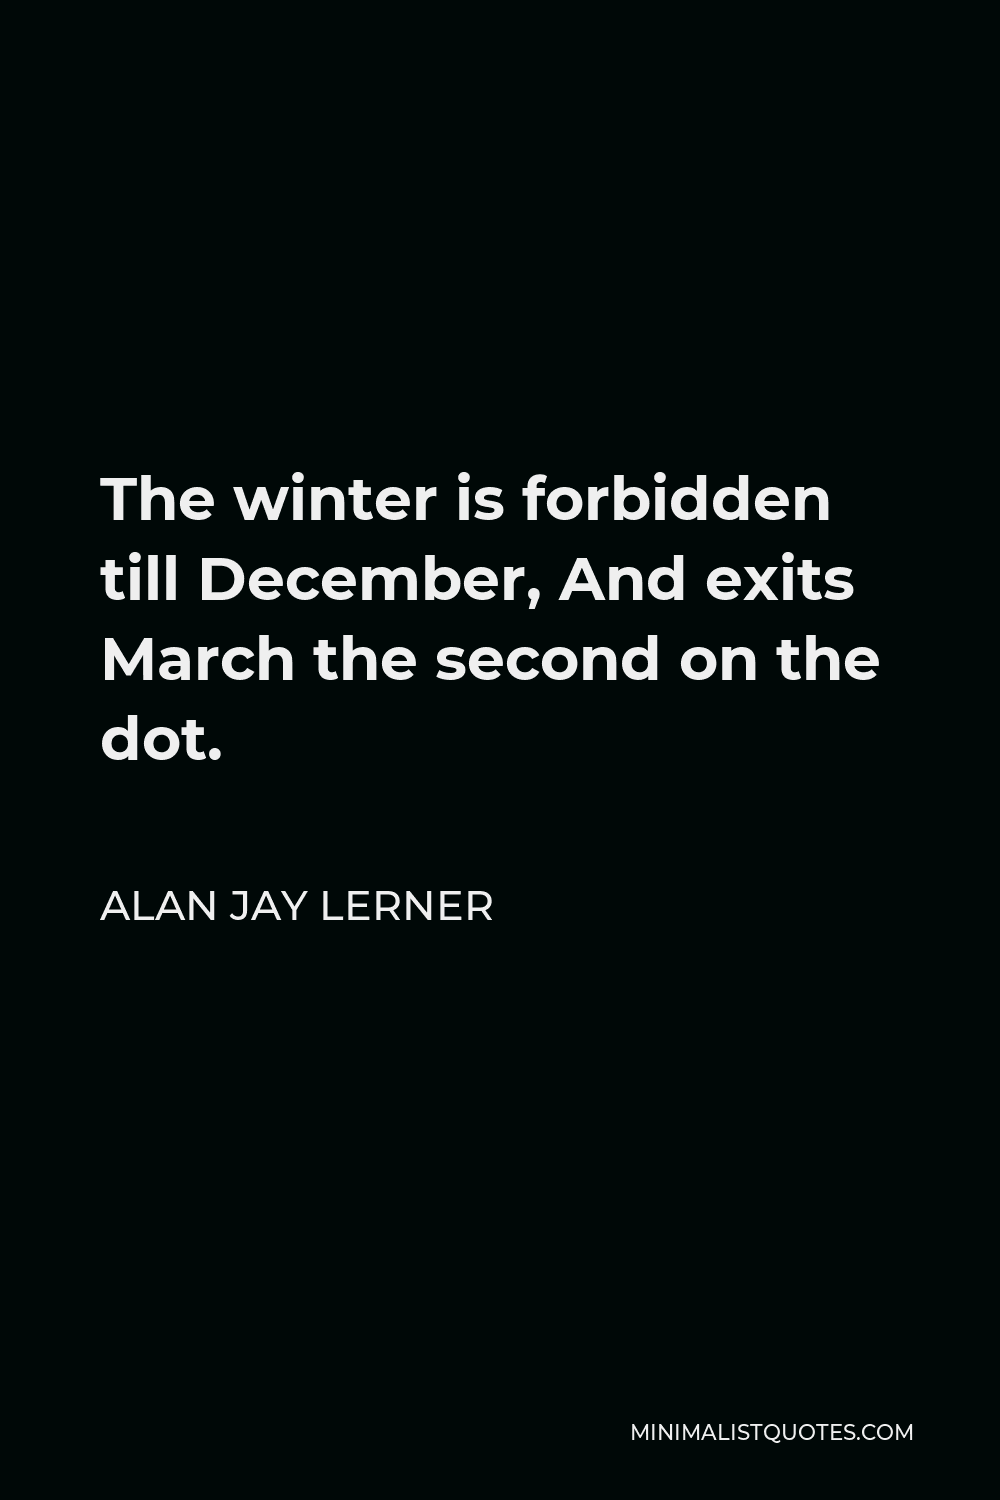 Alan Jay Lerner Quote - The winter is forbidden till December, And exits March the second on the dot.